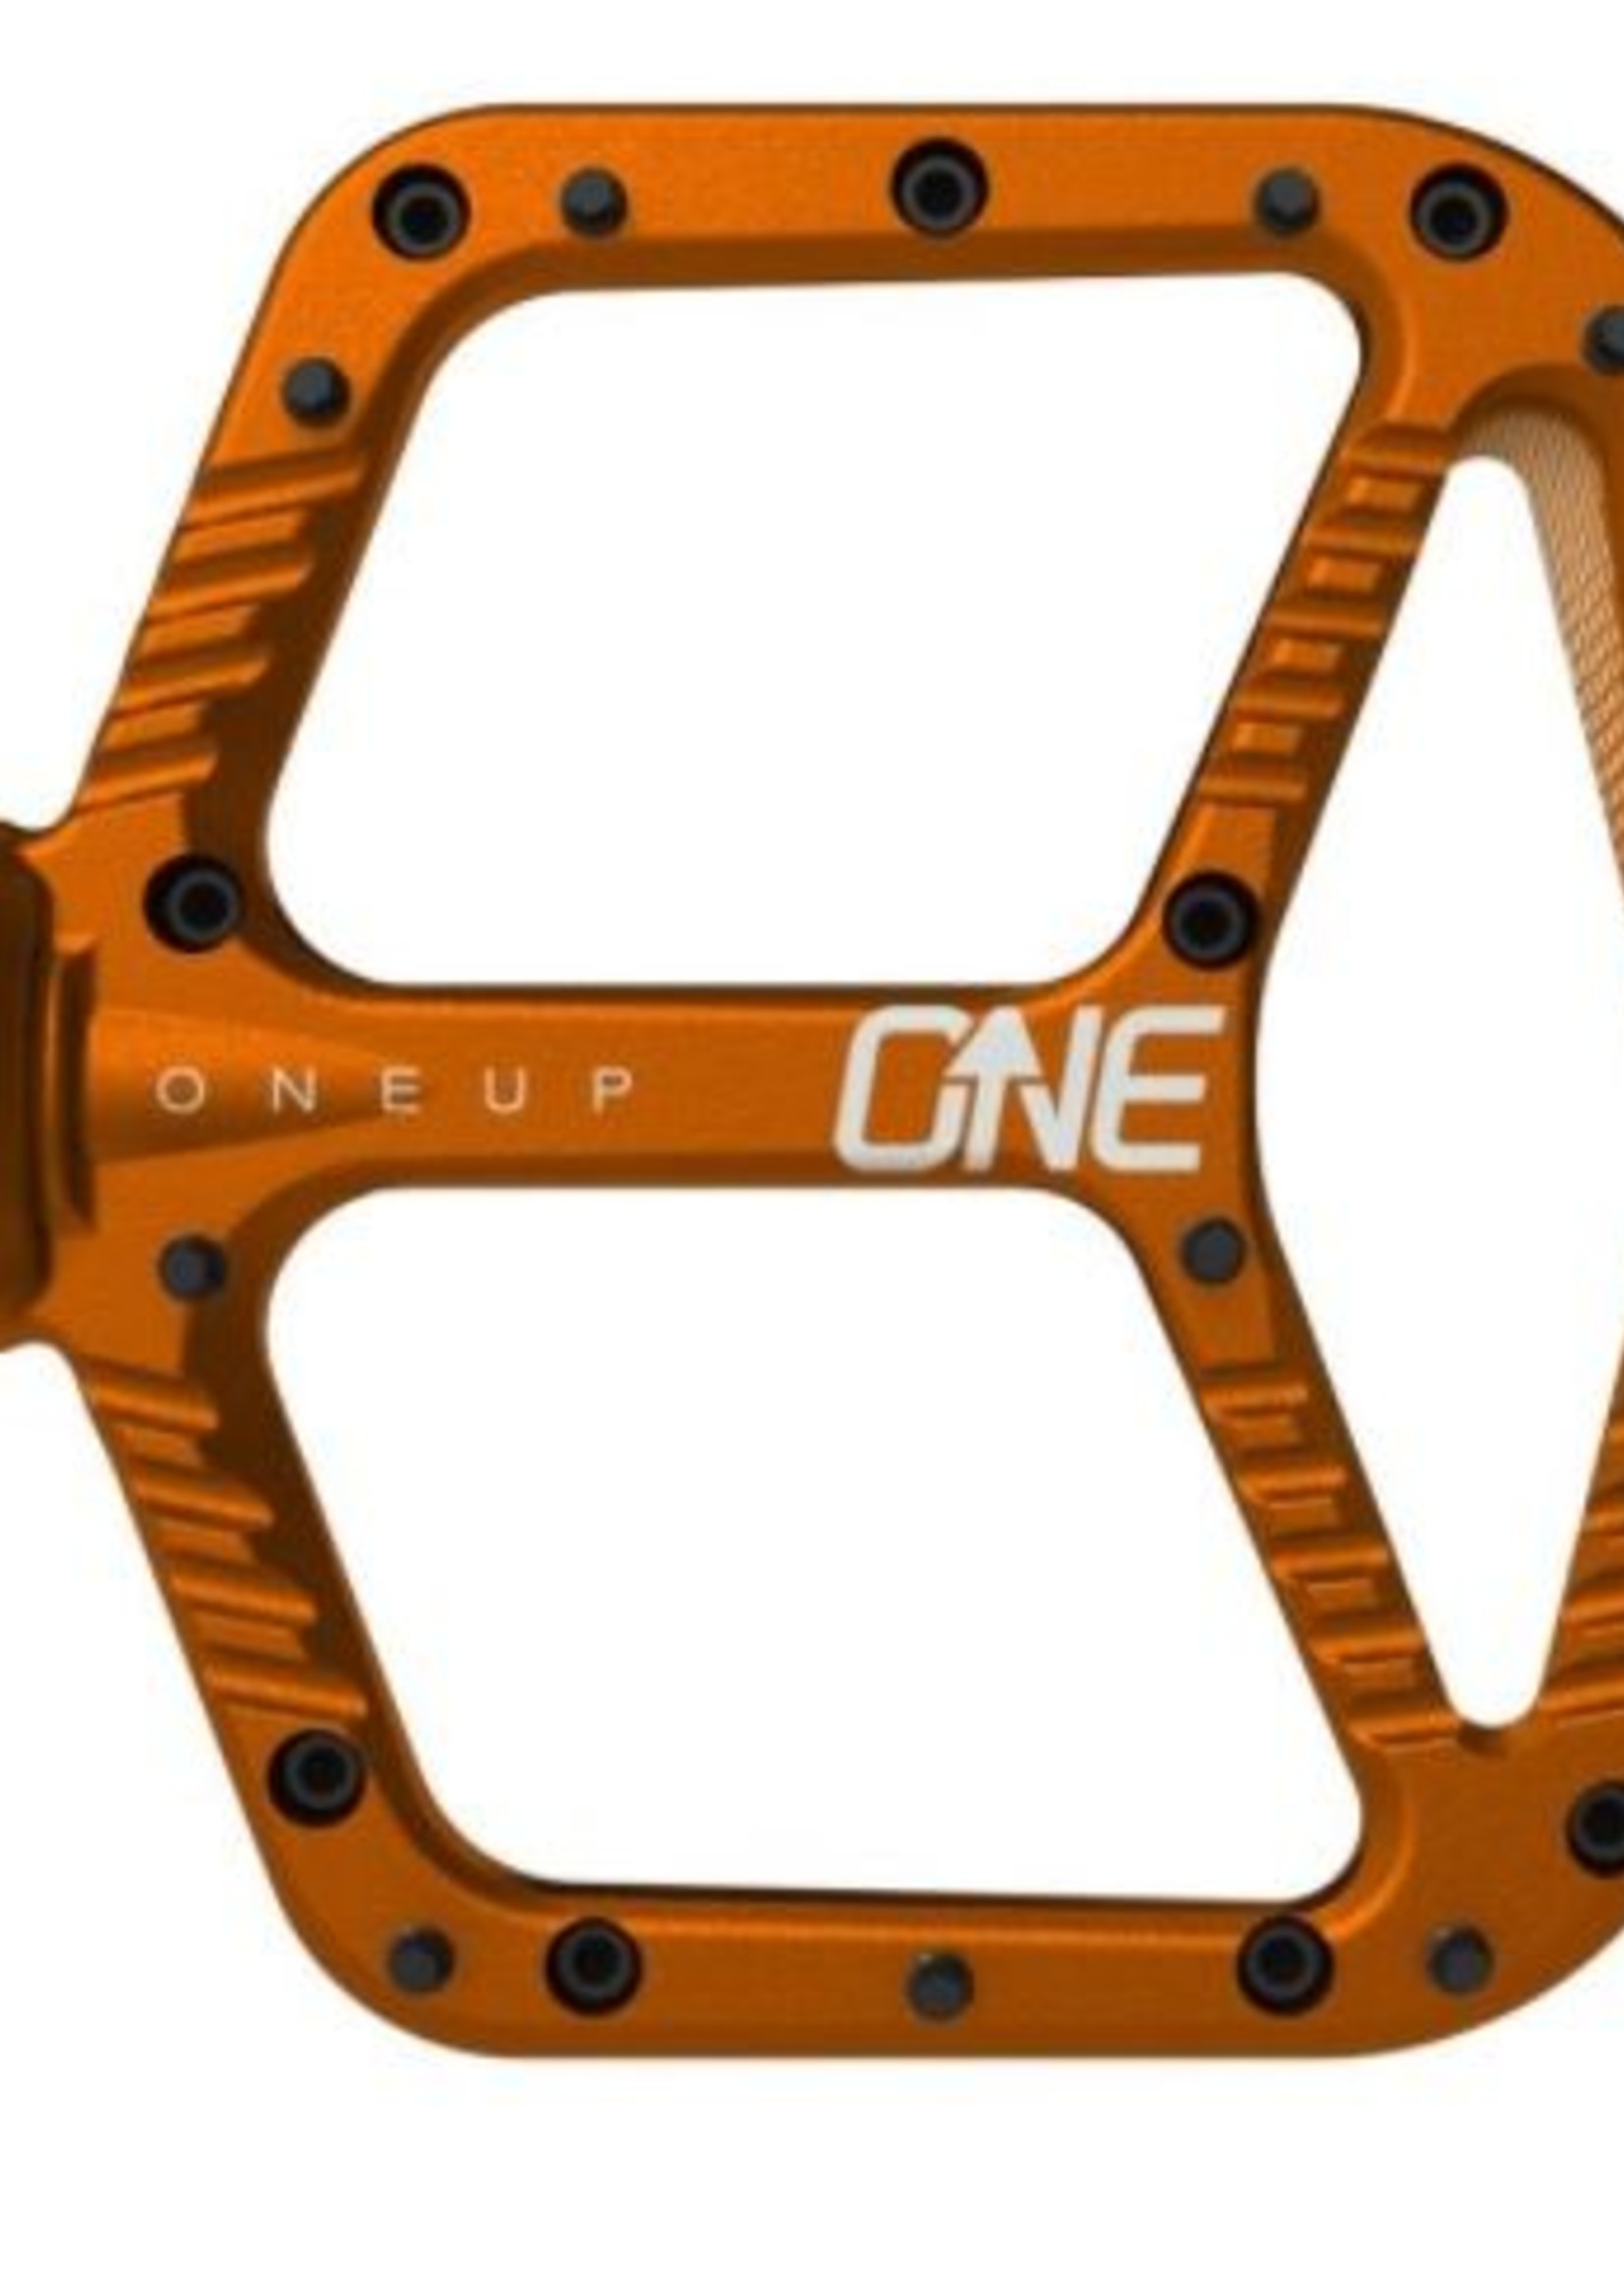 ONEUP Oneup Pedals Alu